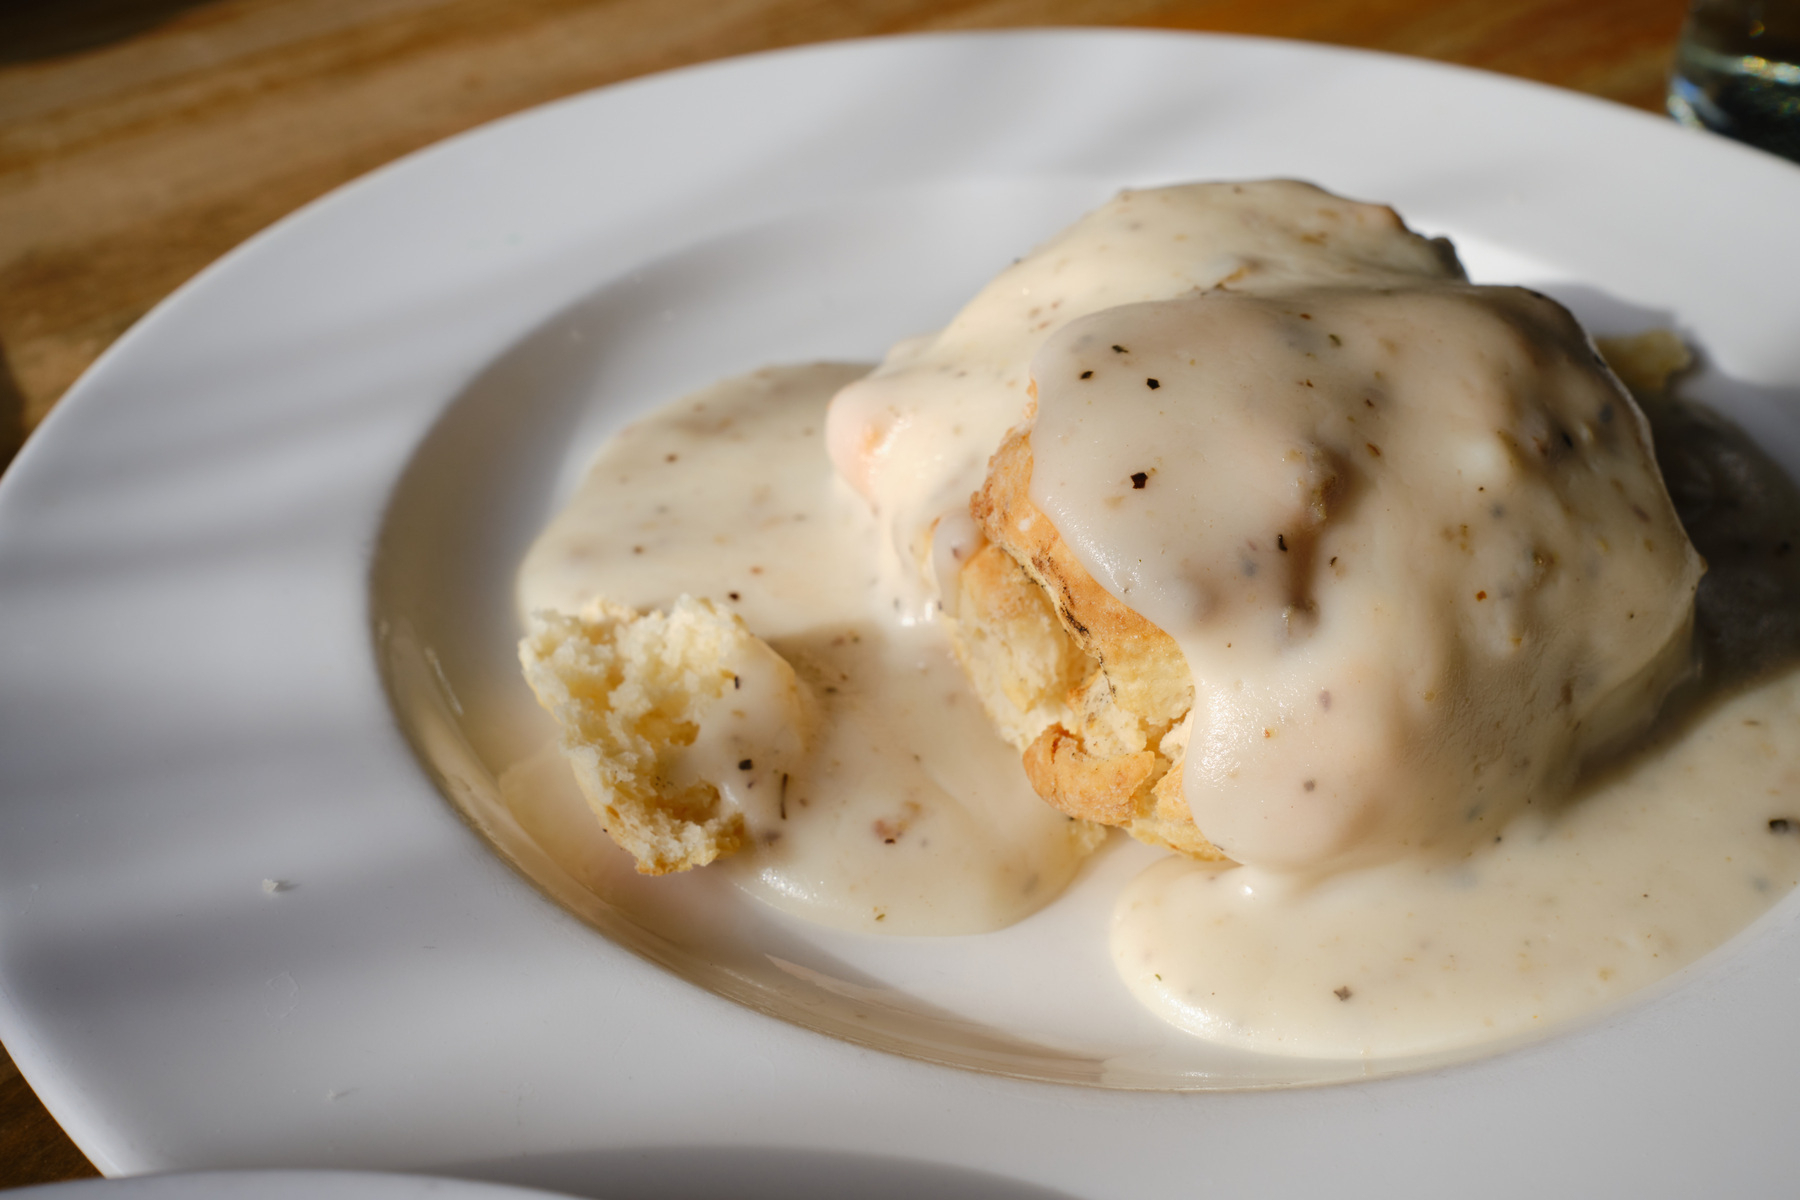 a single biscuit, covered in sausage gravy, lit by morning sunlight coming through a window. 